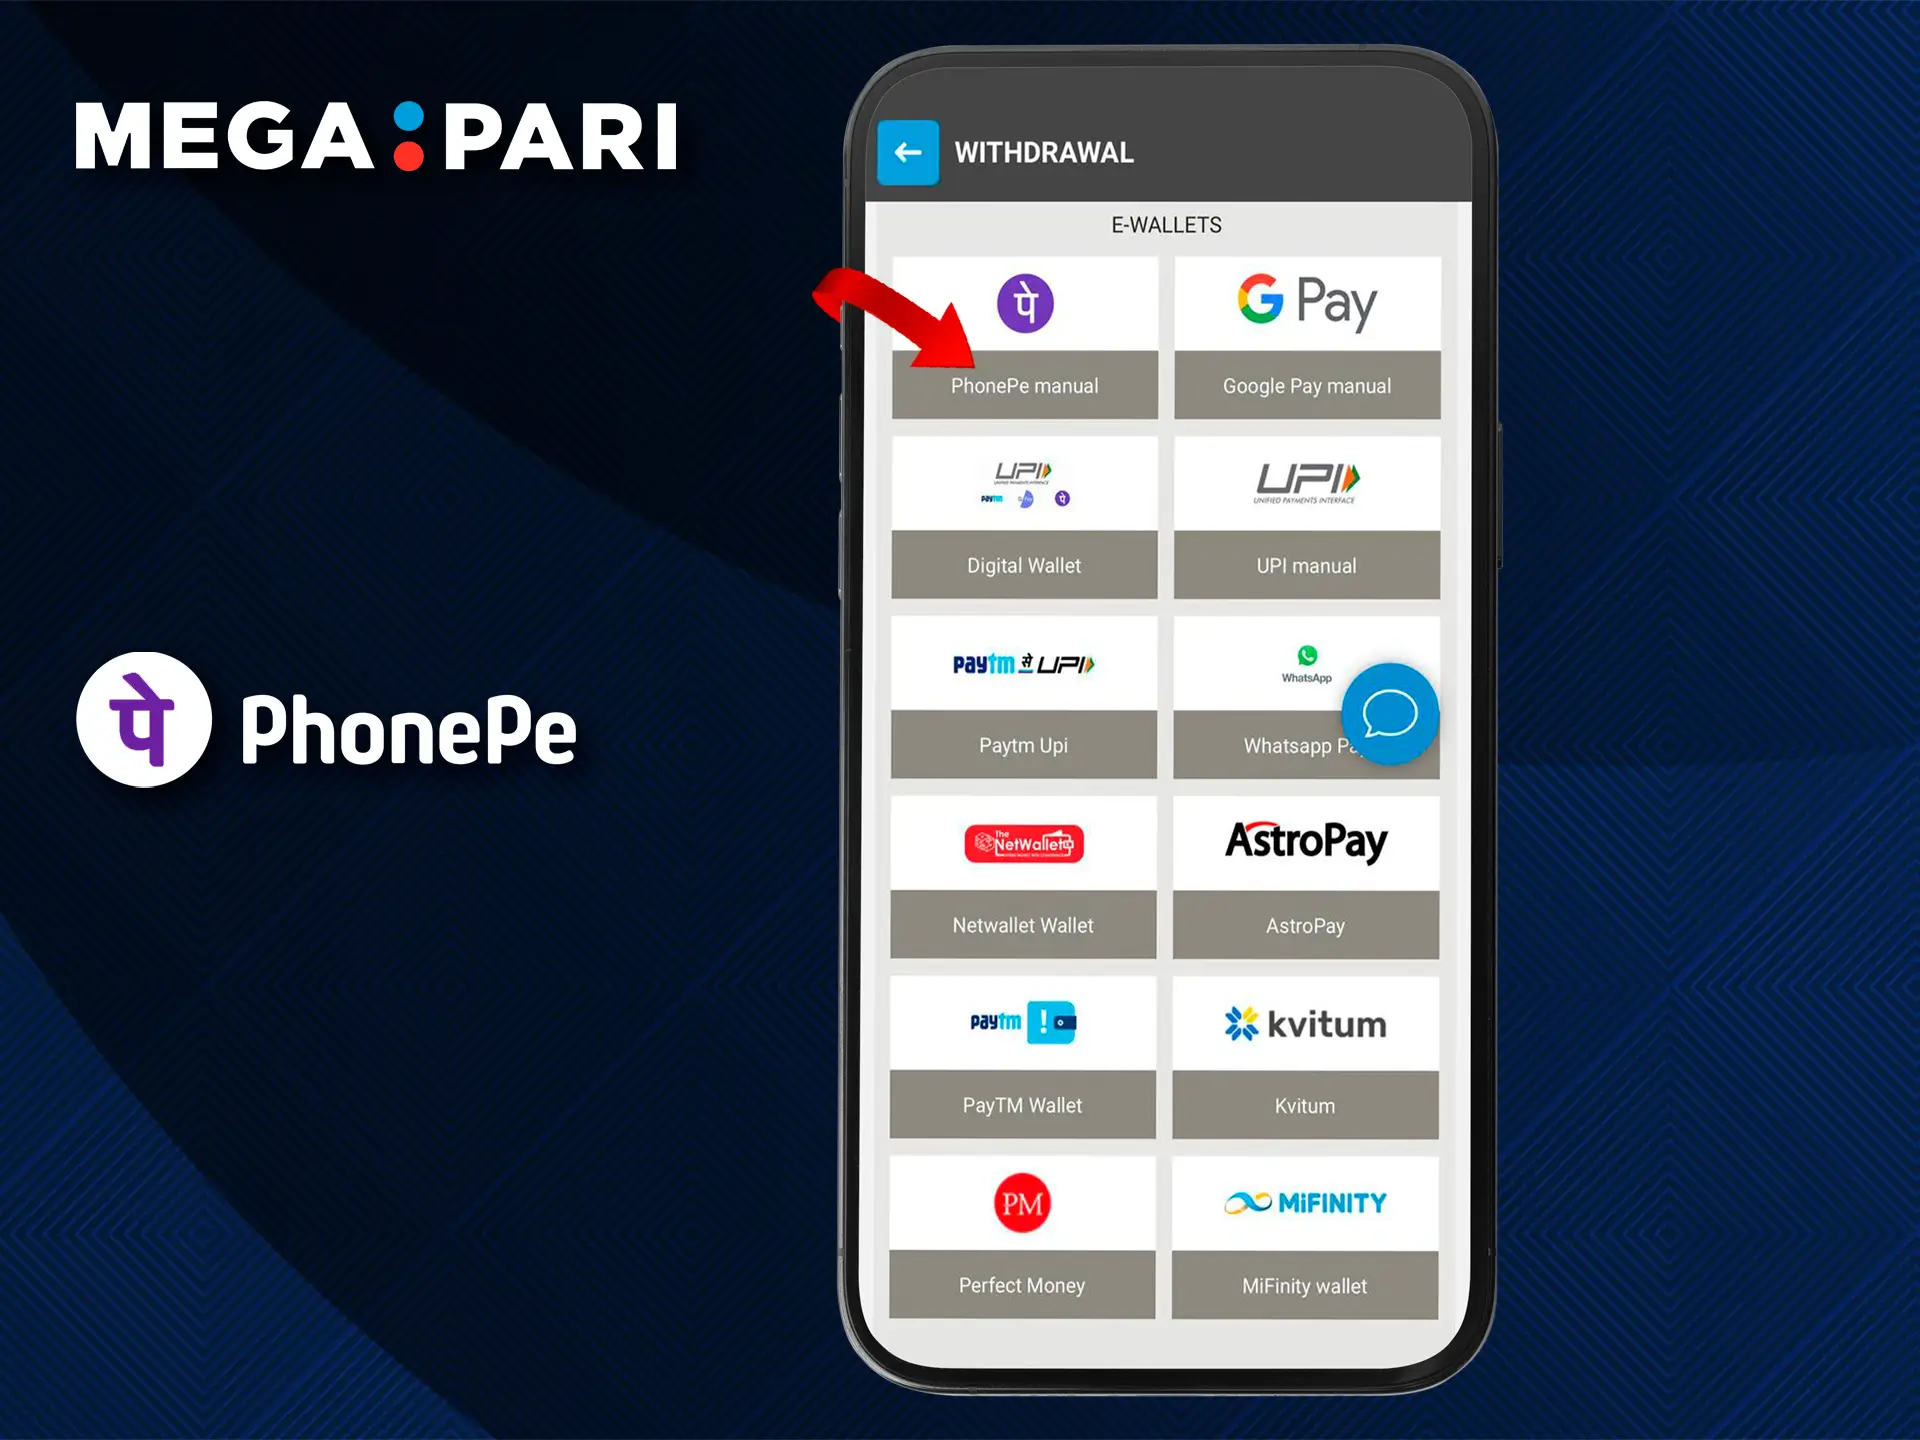 Select the Megapari personal account icon and open the PhonePe method withdrawal tab.